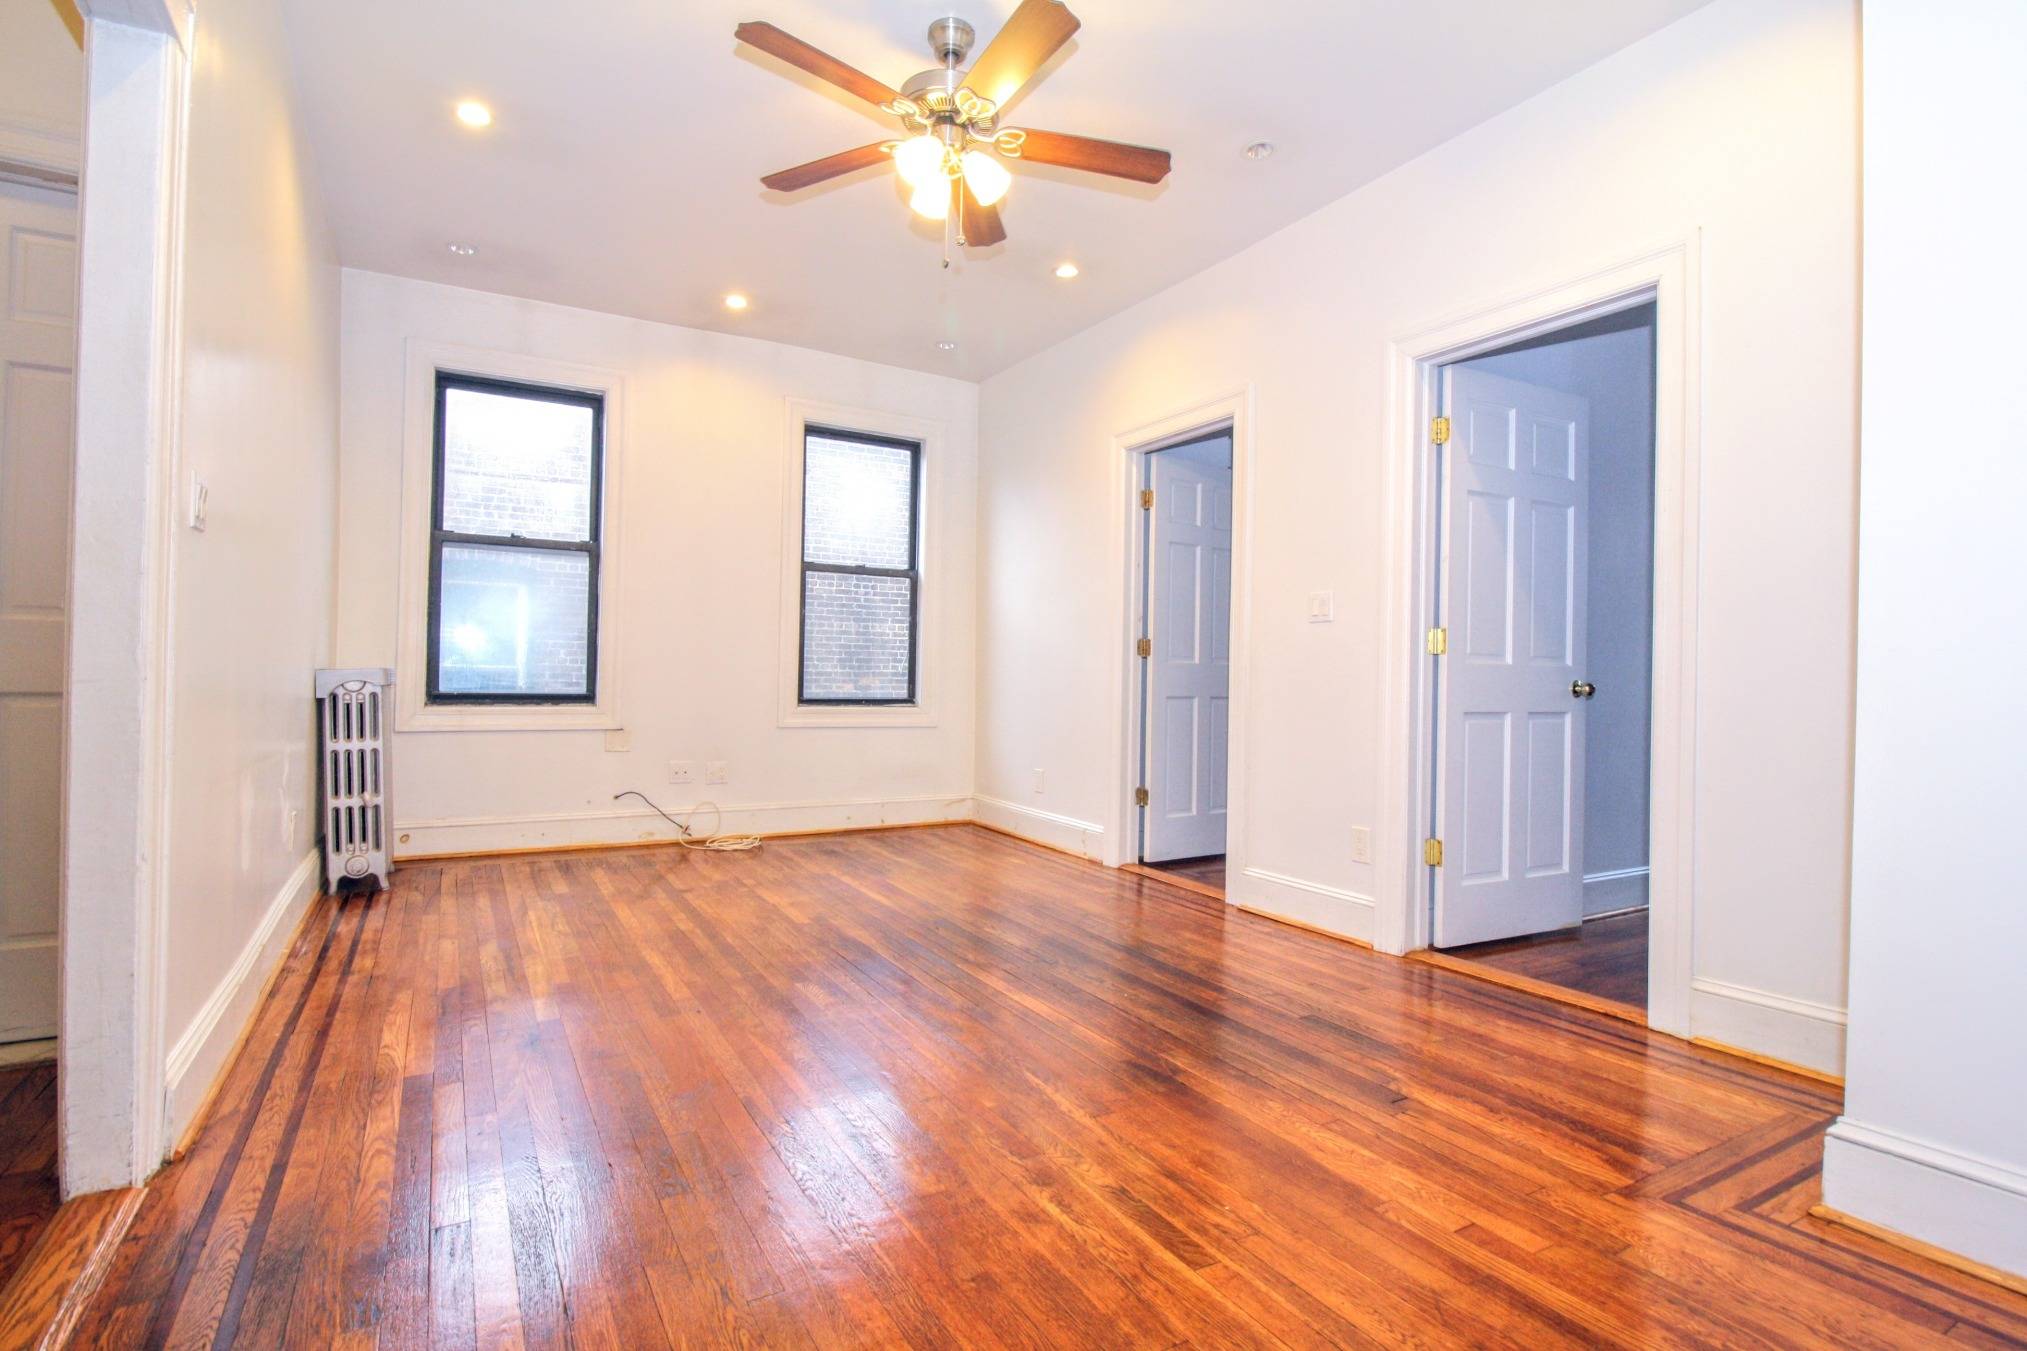 Space and storage abound in this luxurious 2 bedroom in Prime Sunnyside.